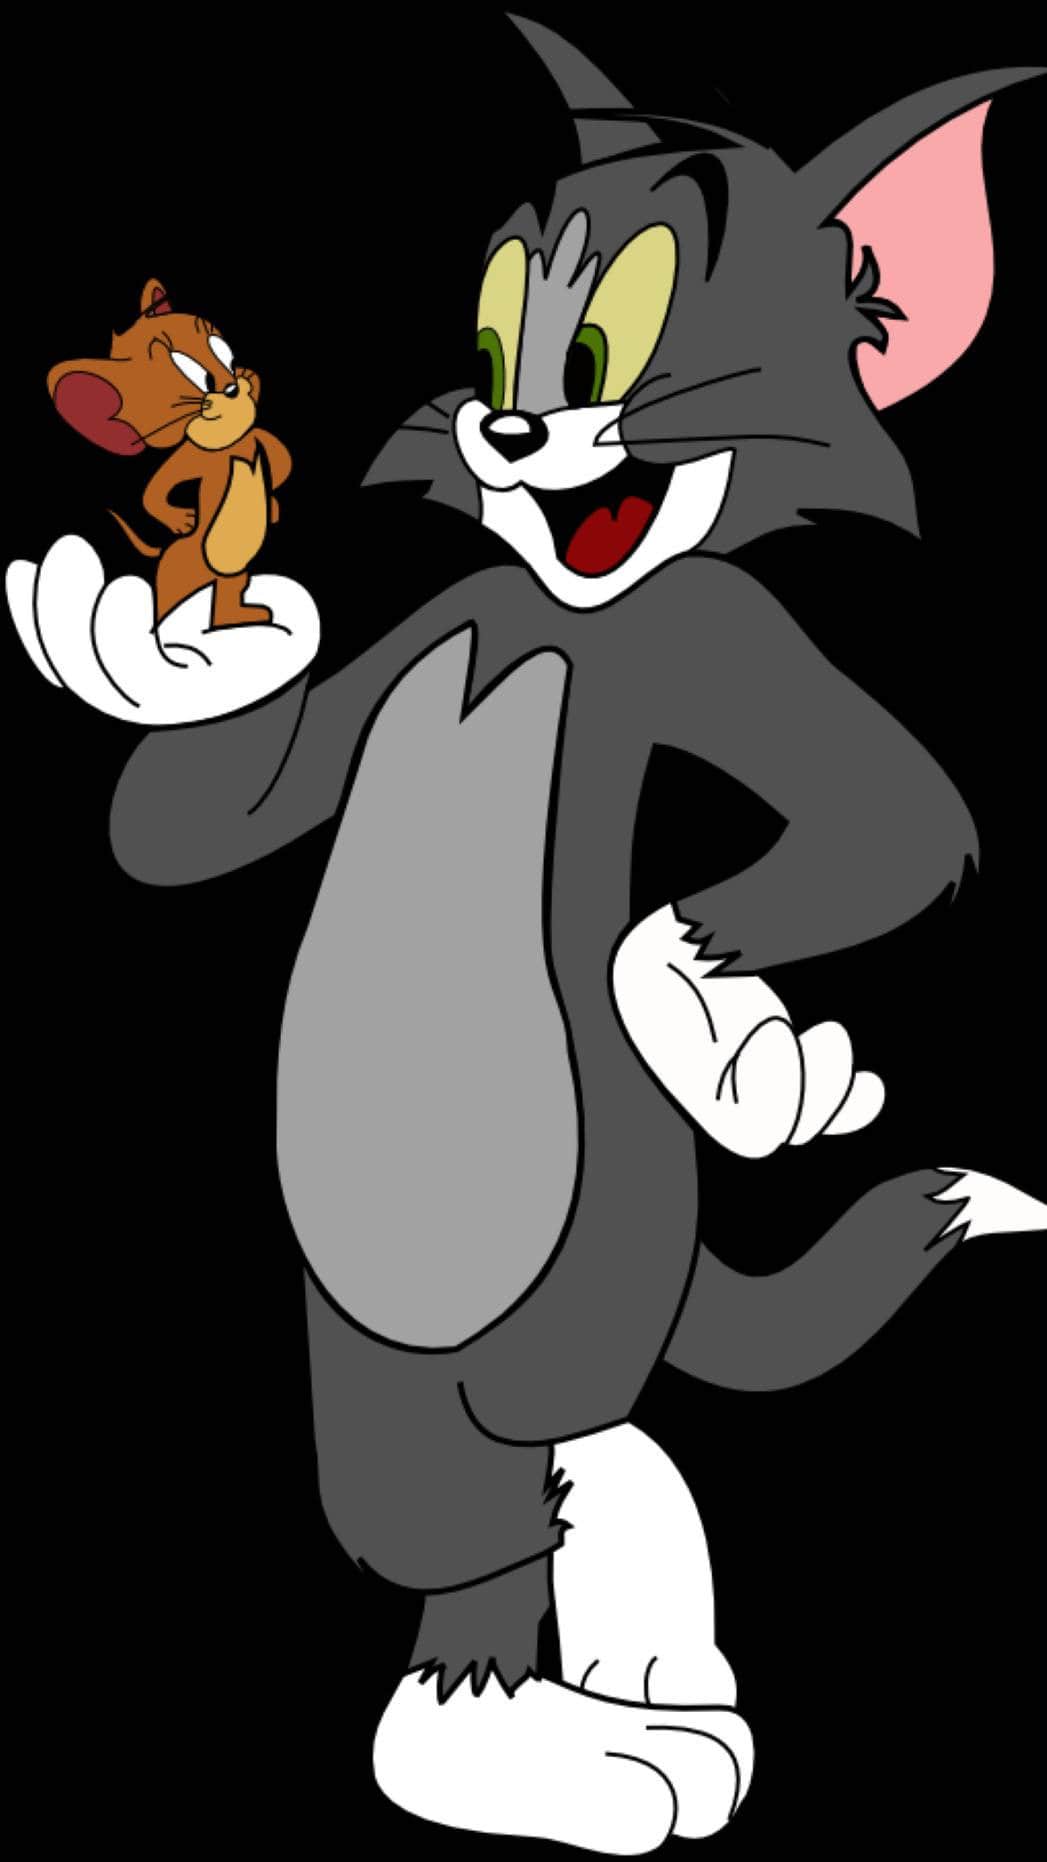 Tom and jerry cartoon character - Tom and Jerry